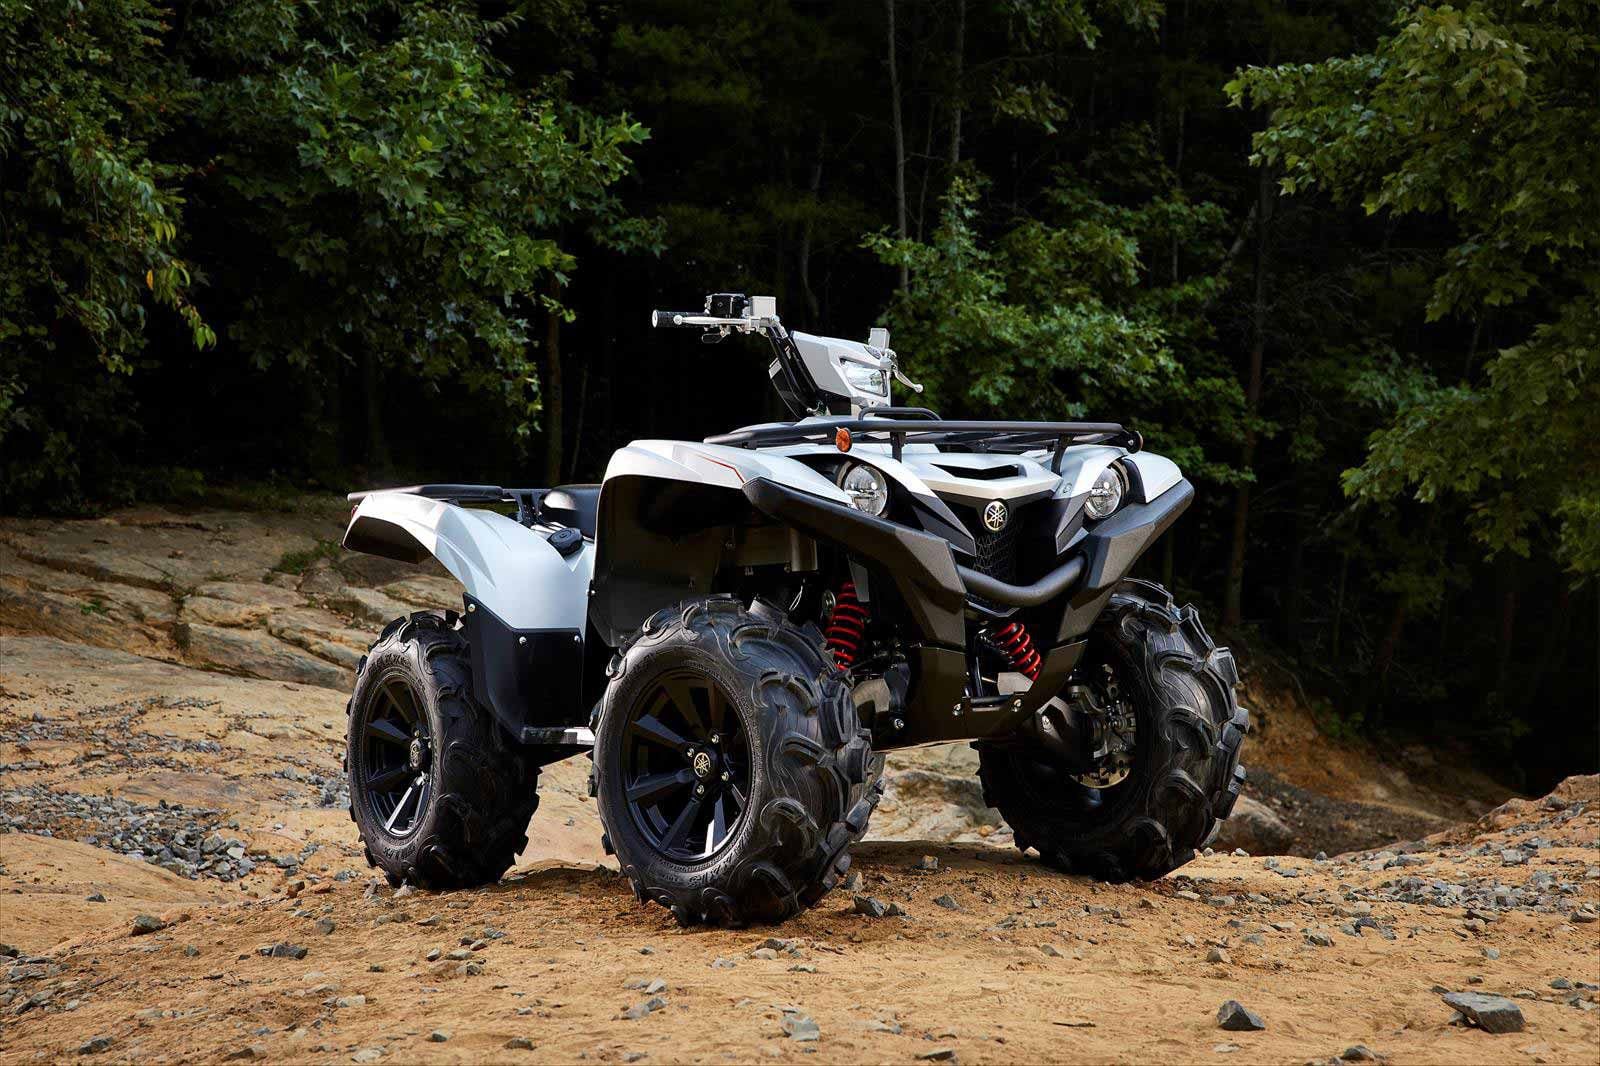 The 2022 Grizzly EPS SE receives upgrades like Maxxis Zilla tires on 14-inch aluminum wheels and Matte Silver painted bodywork.